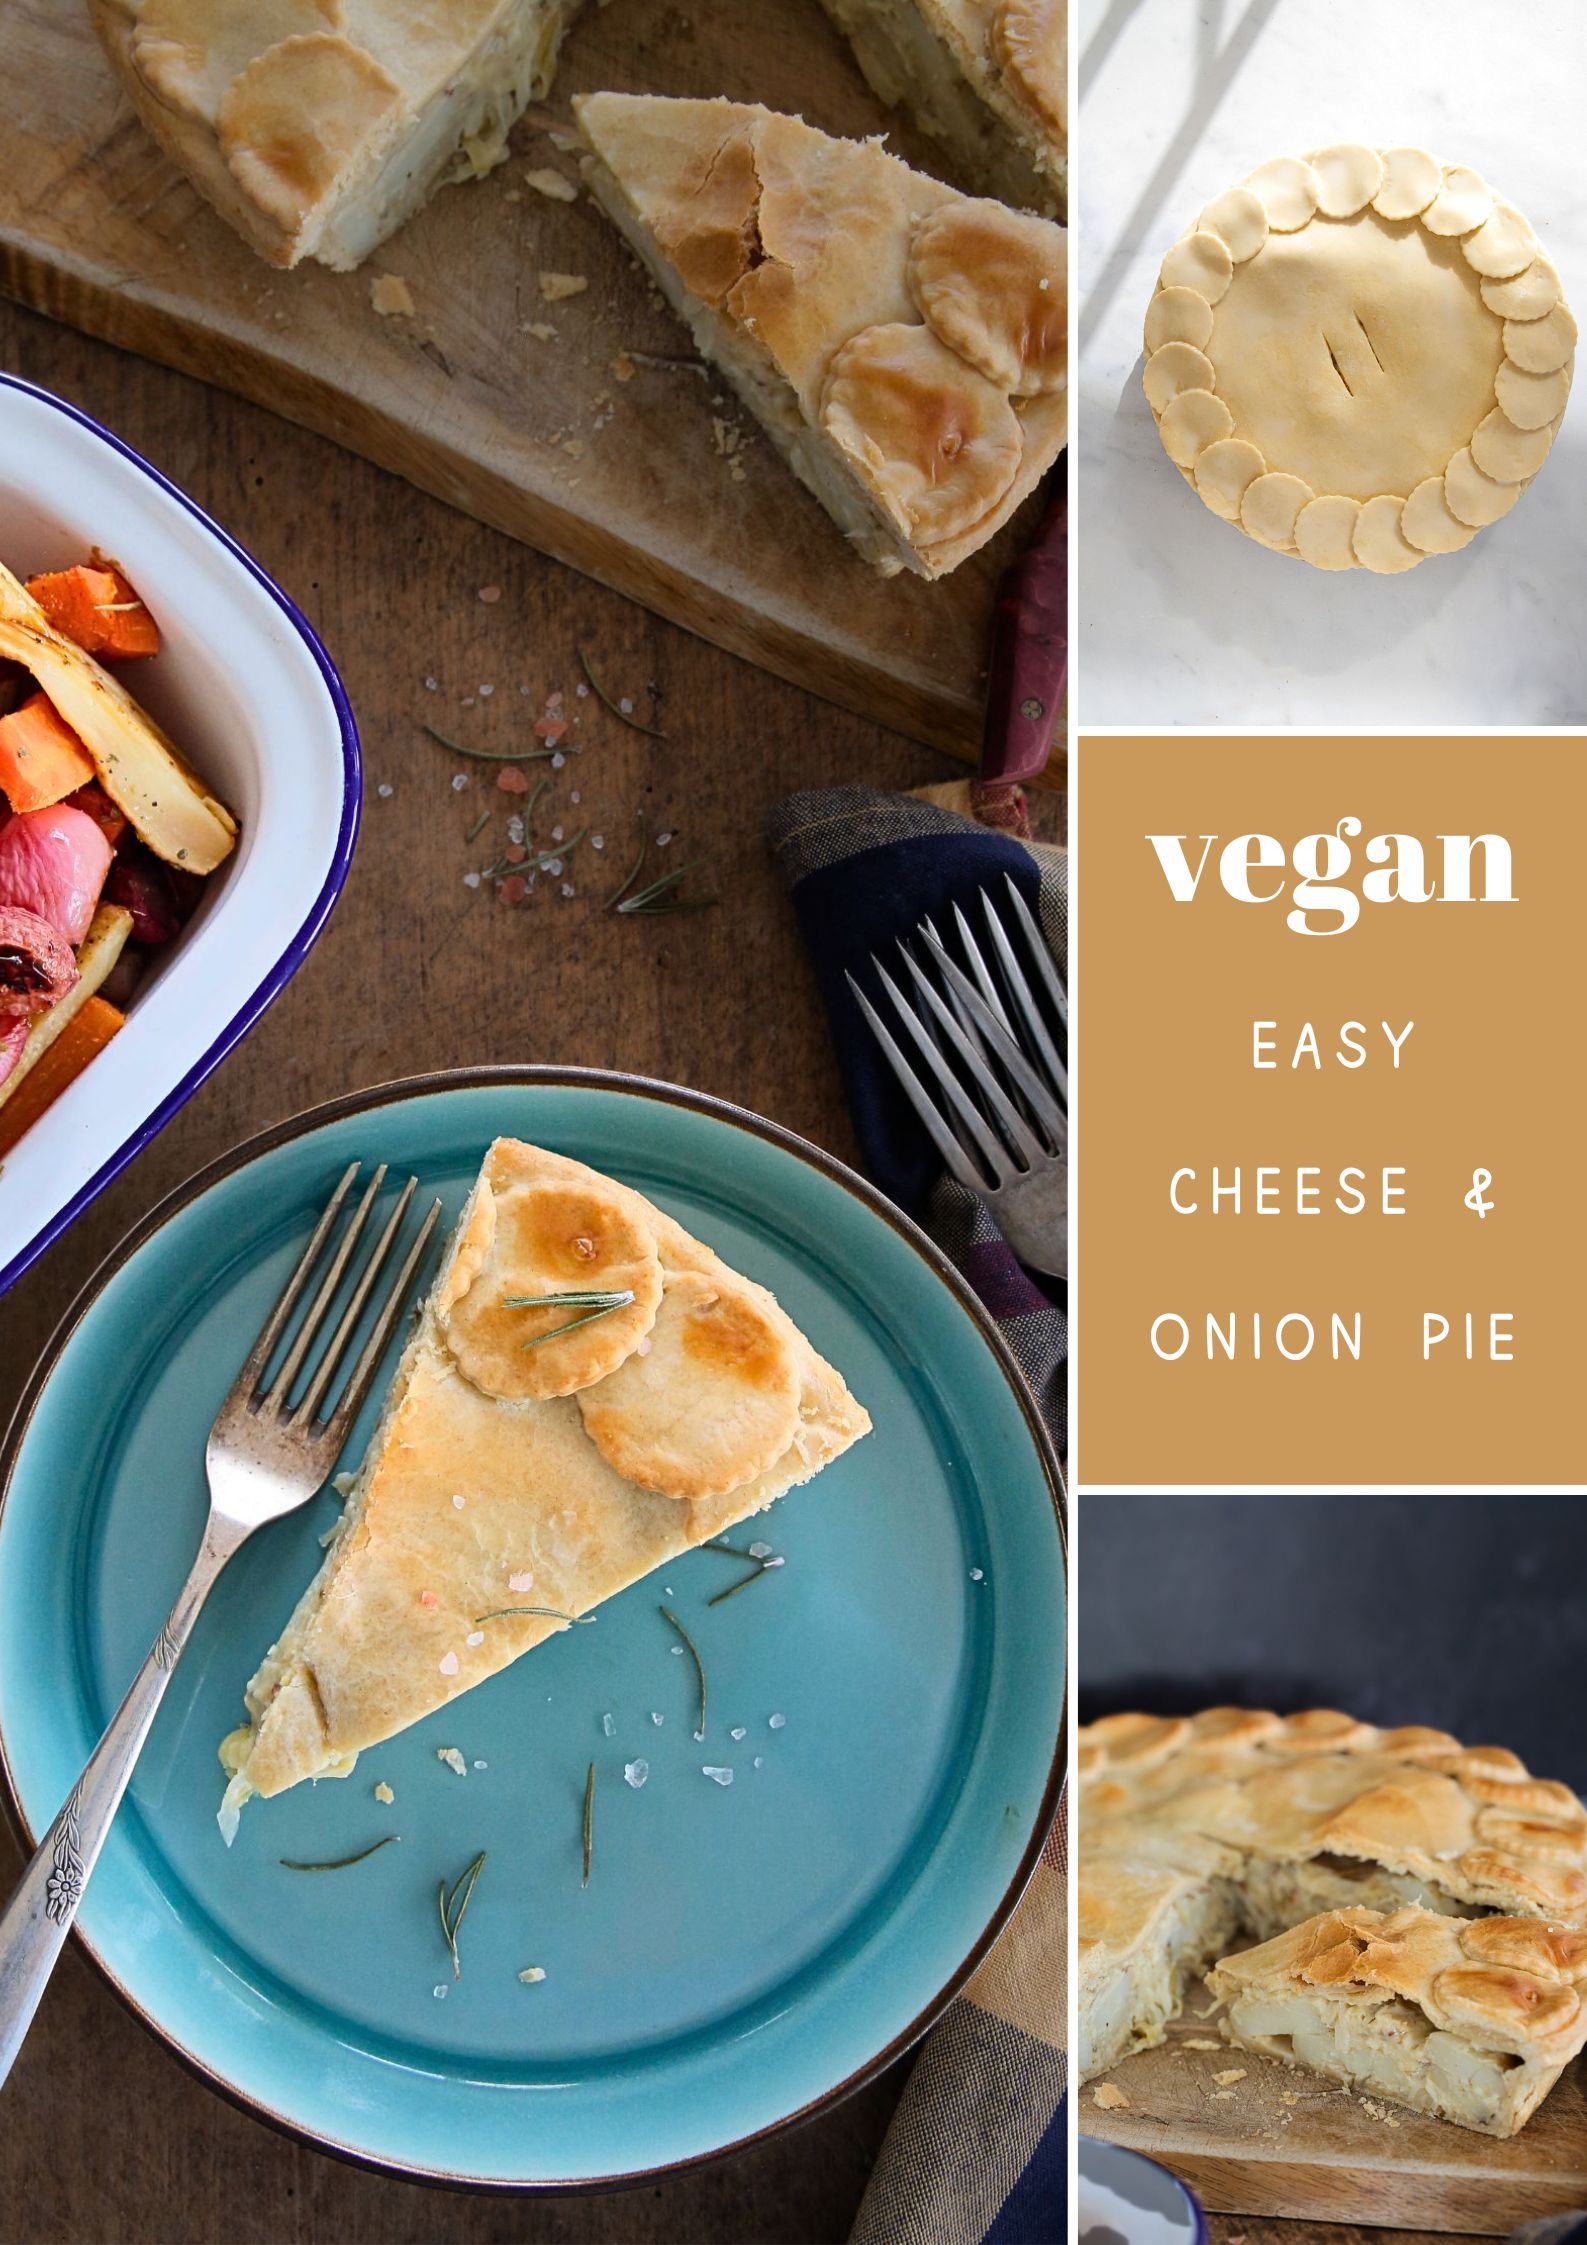 This flavourful and comforting cheese and onion pie uses simple ingredients and an easy homemade pastry crust. I've included potatoes to make it a meal in a pie - serve with a simple salad or steamed or roasted vegetables for a hearty meal! Leftovers are just as lovely cold for packed lunches too! #veganpie #potatopie #pierecipes #savourypie